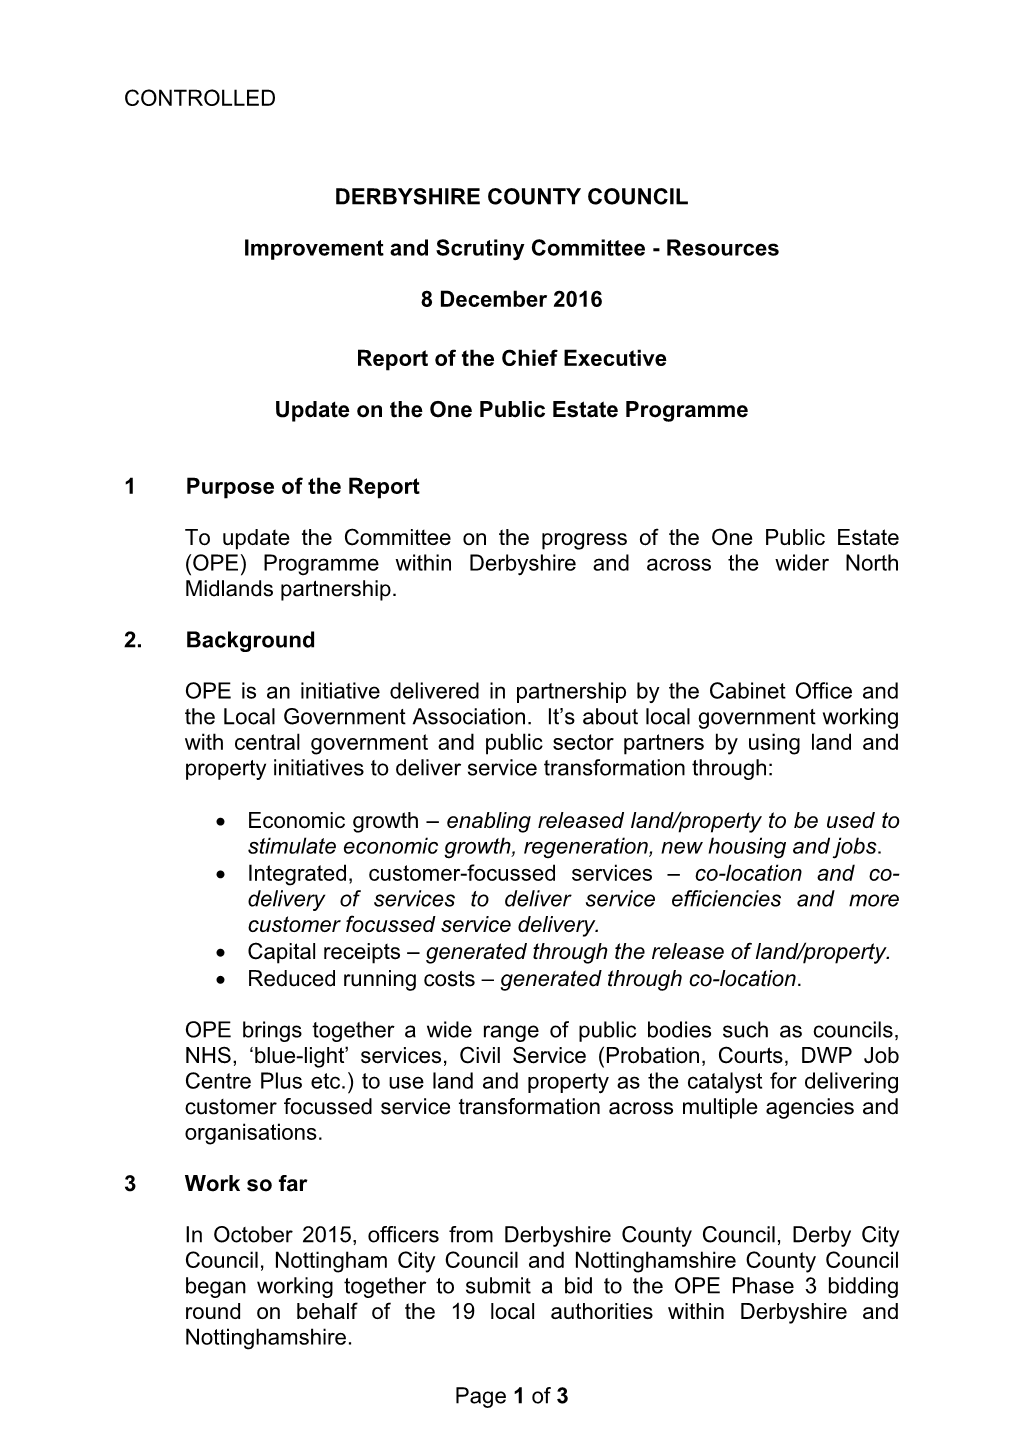 Page 1 of 3 CONTROLLED DERBYSHIRE COUNTY COUNCIL